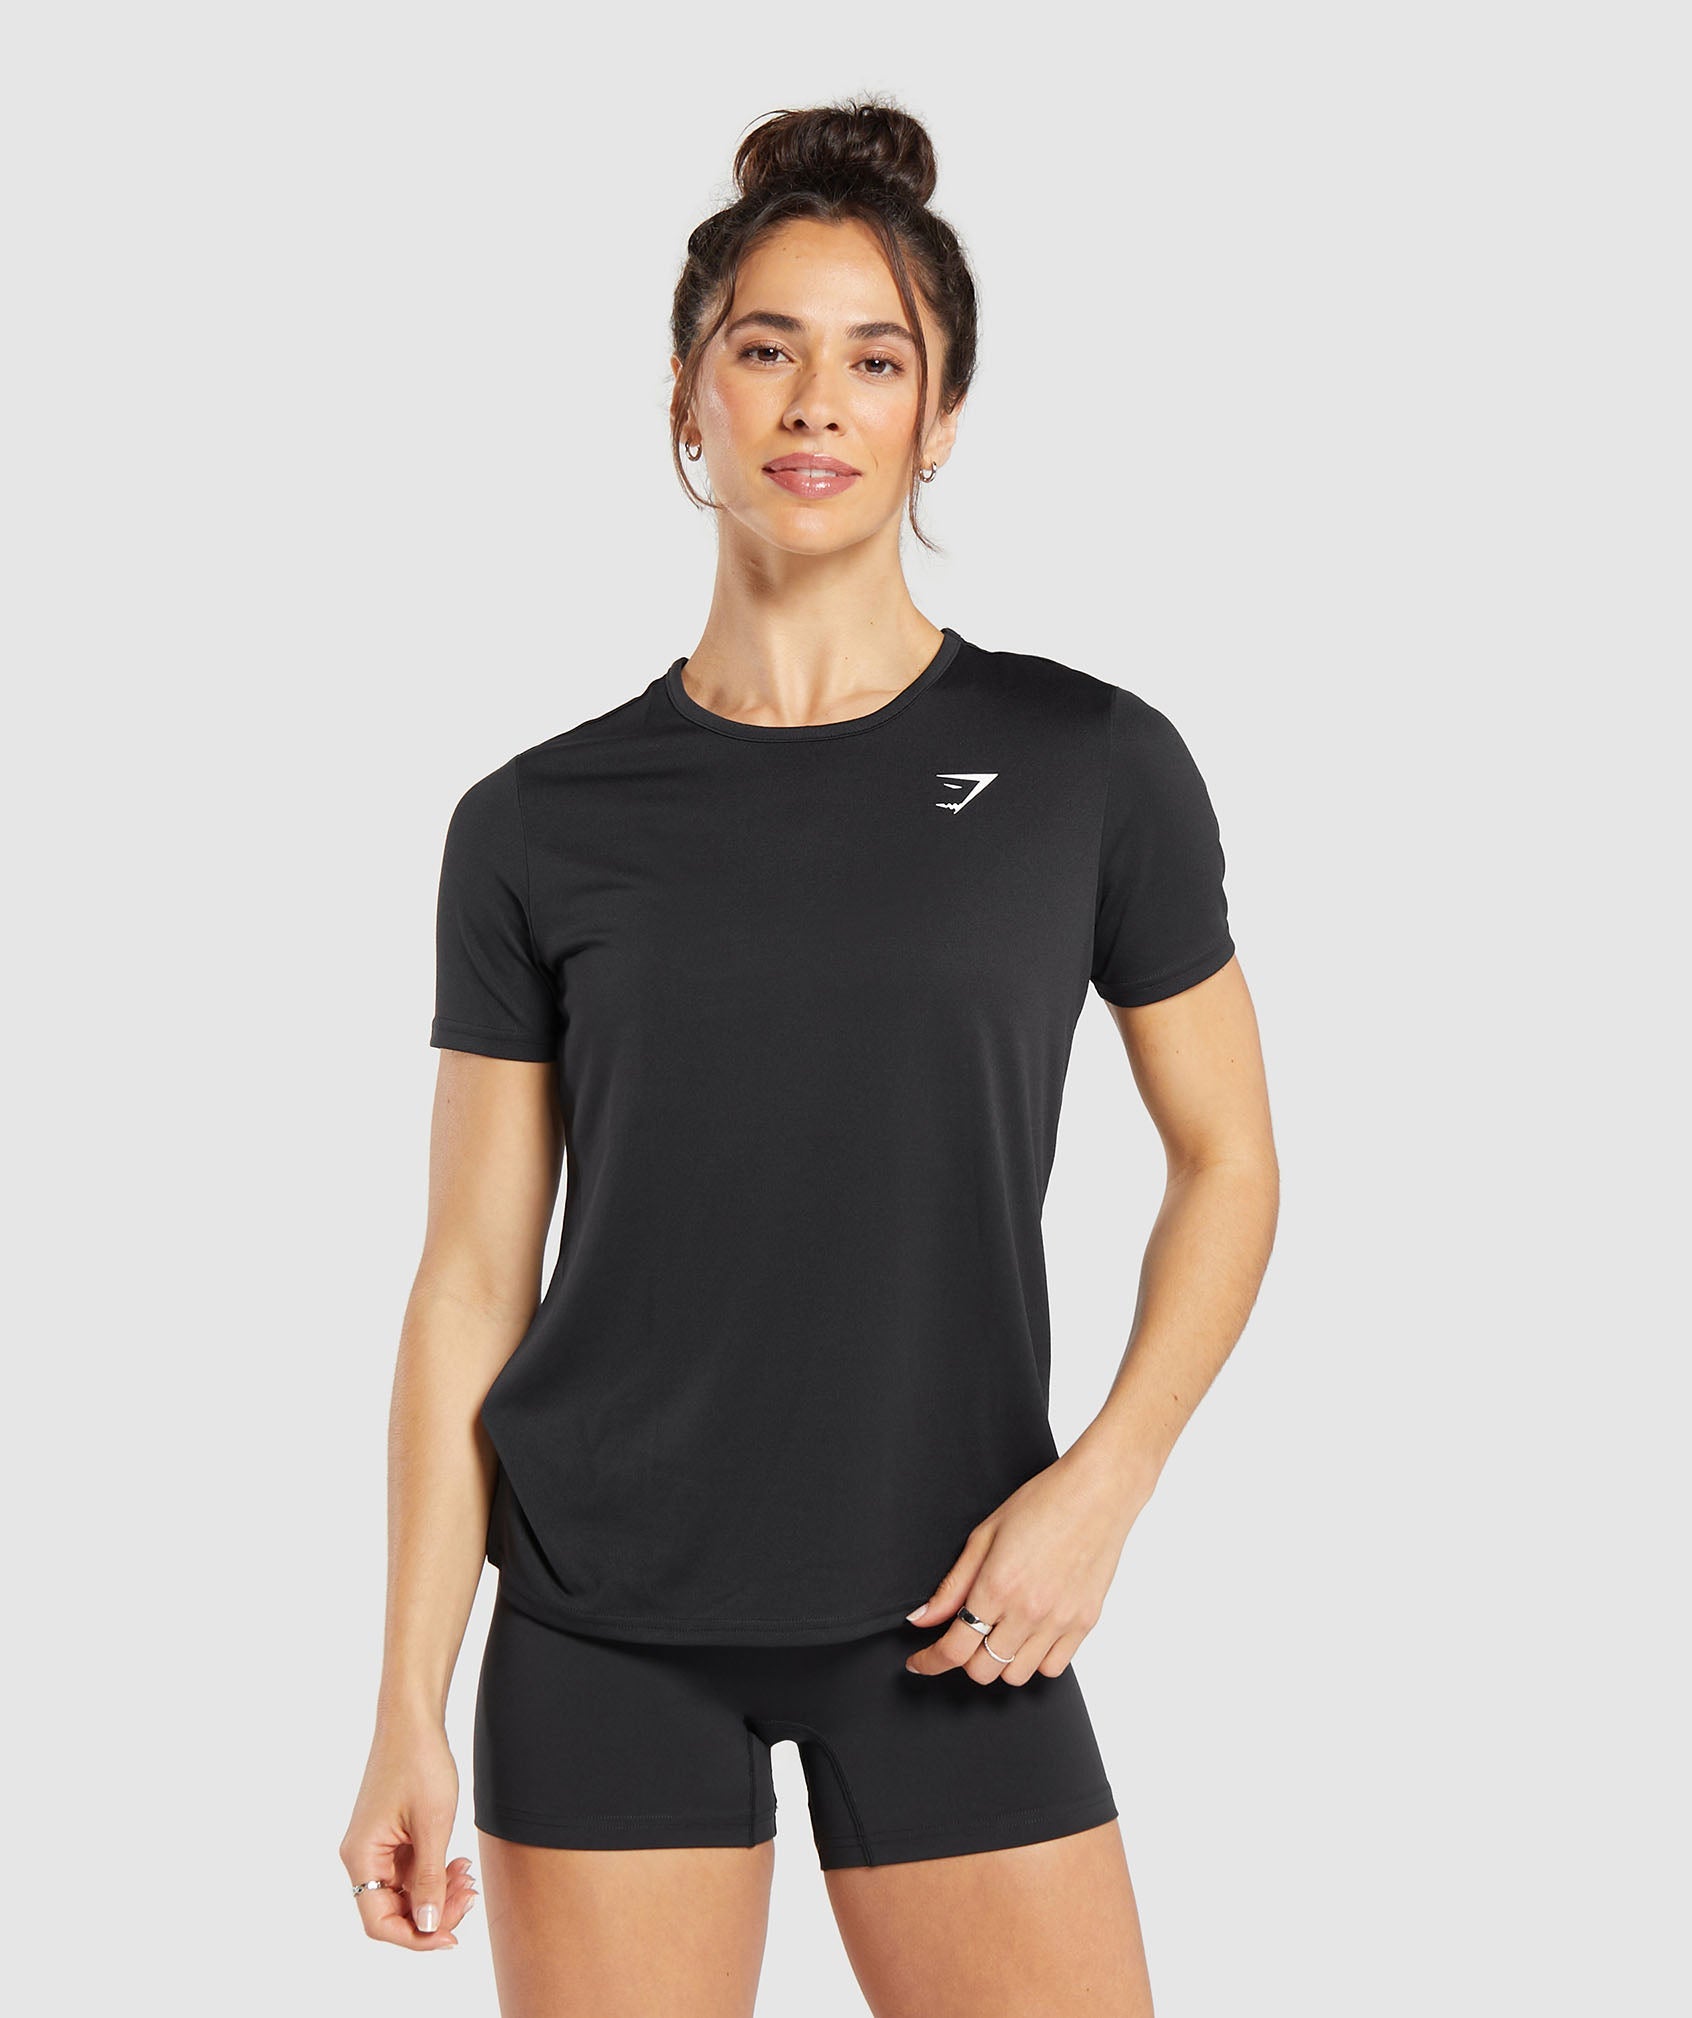 Training T-Shirt in Black is out of stock